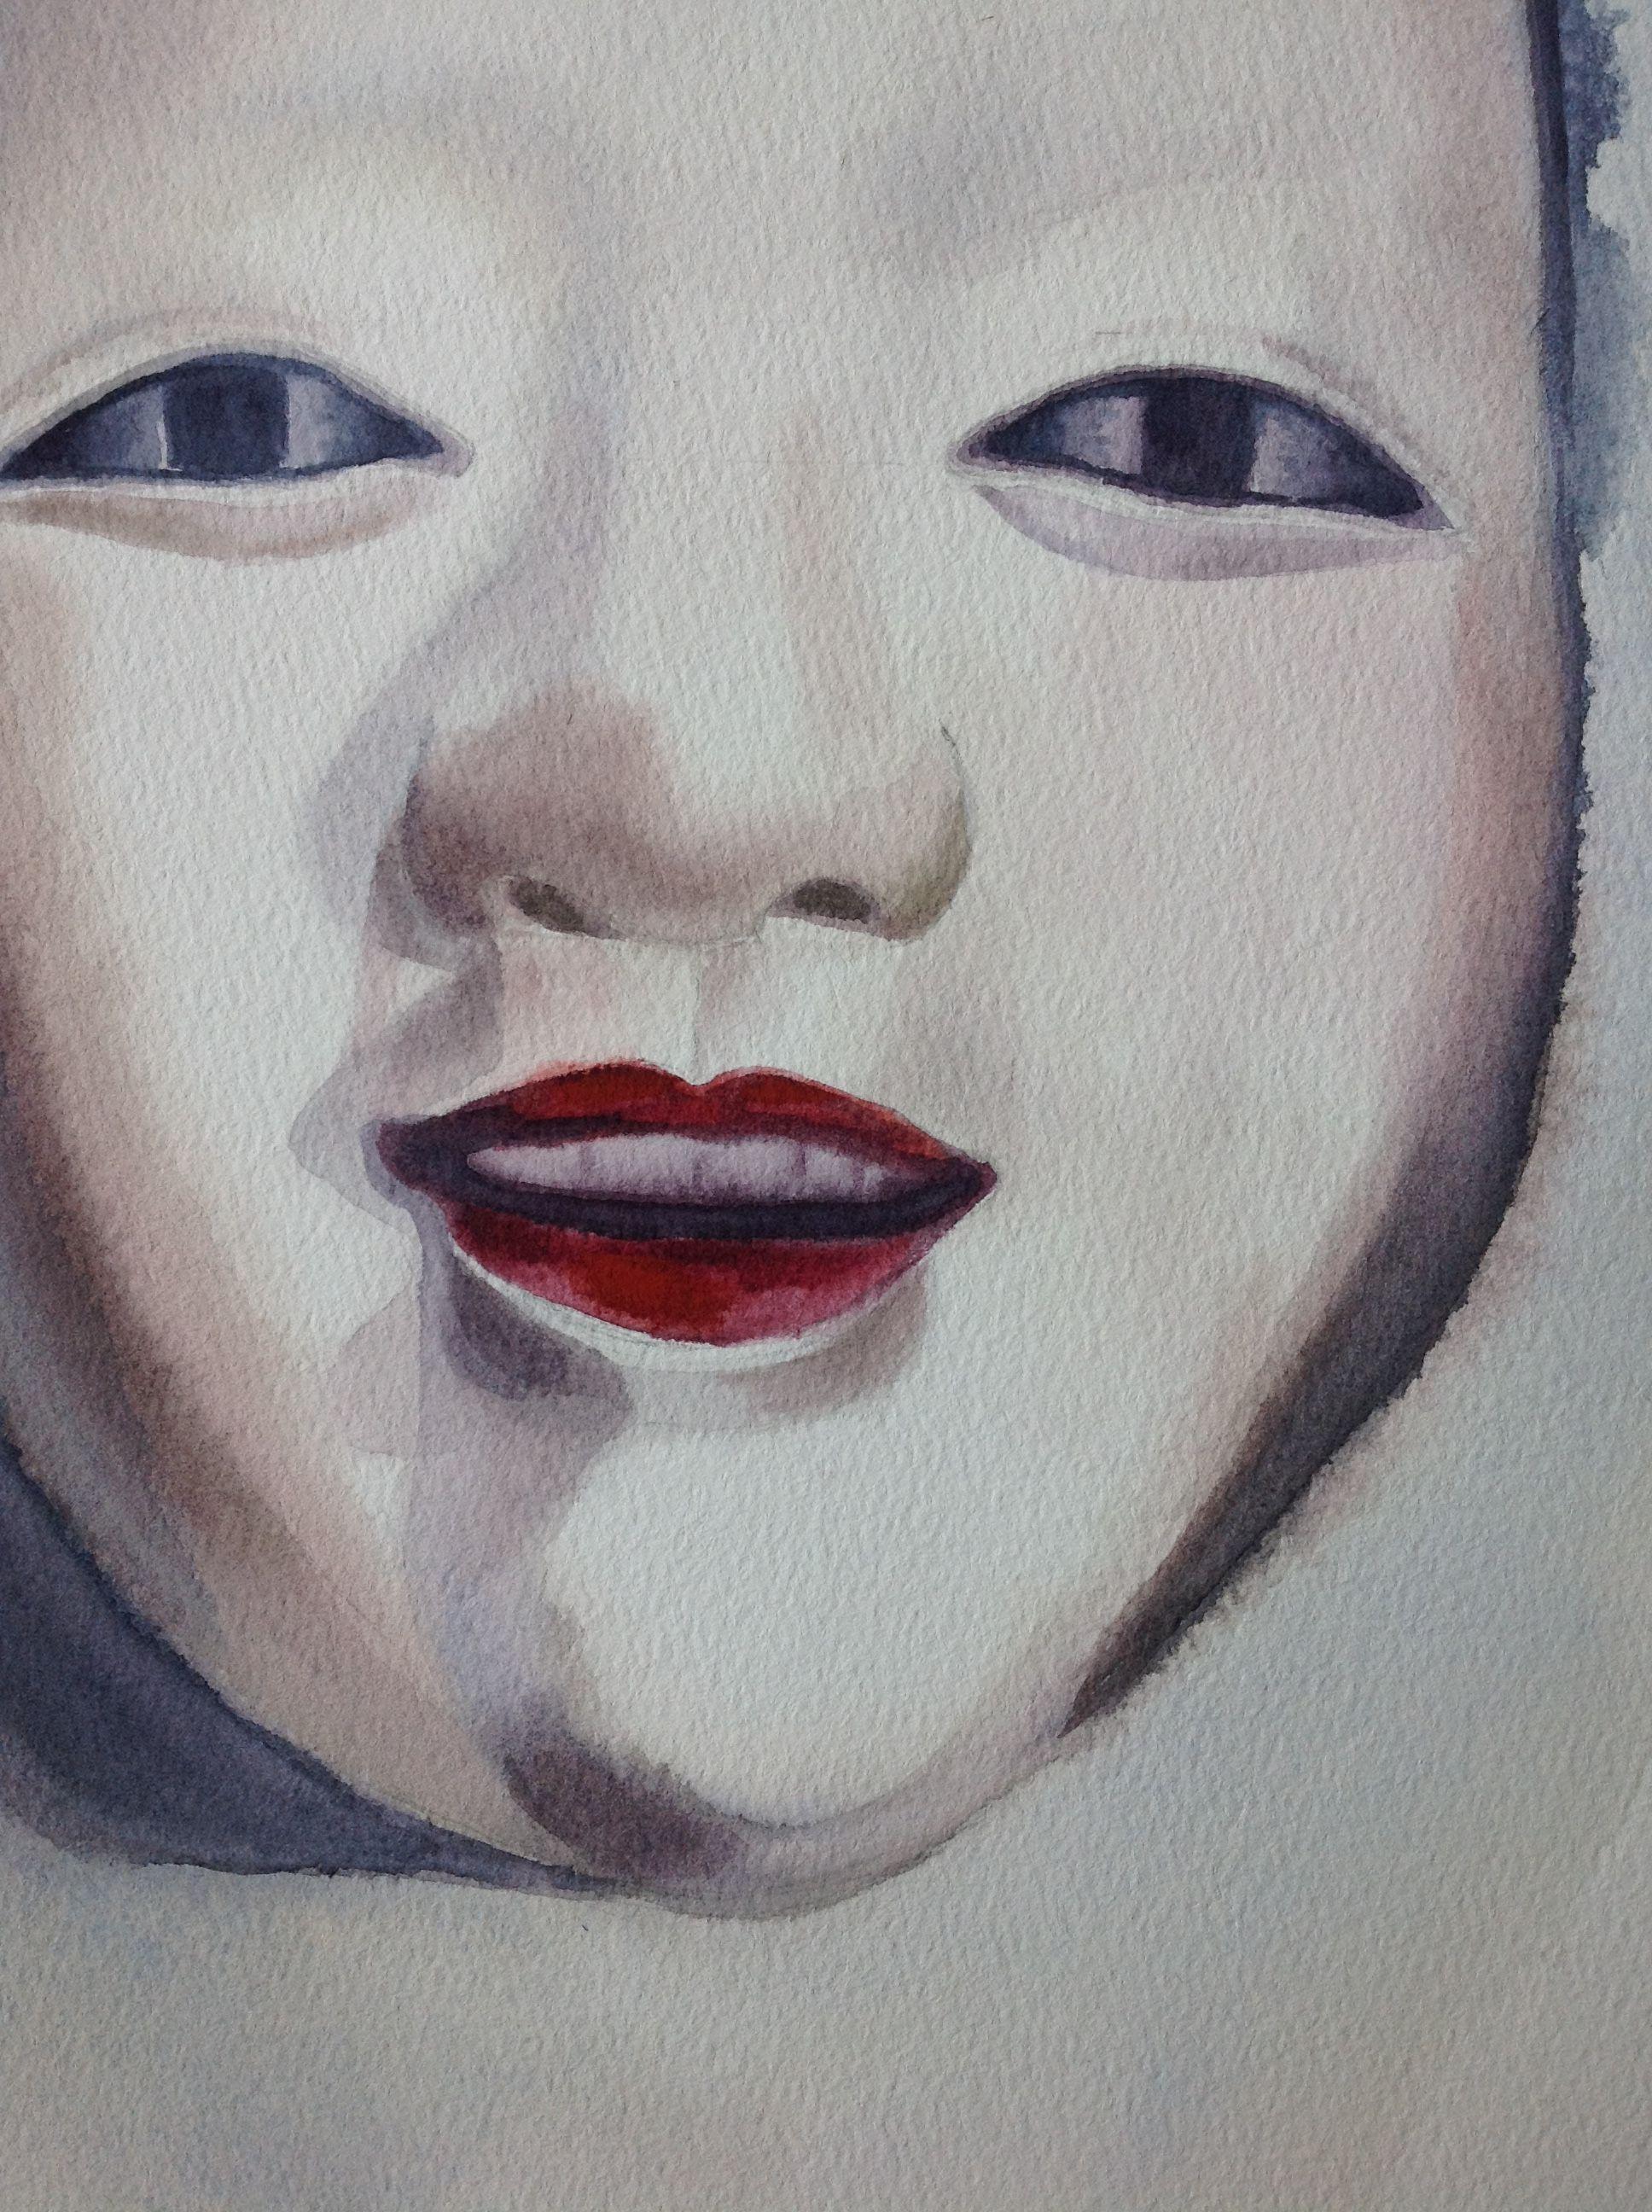 Noh Mask, Painting, Watercolor on Paper - Contemporary Art by Anyck Alvarez Kerloch